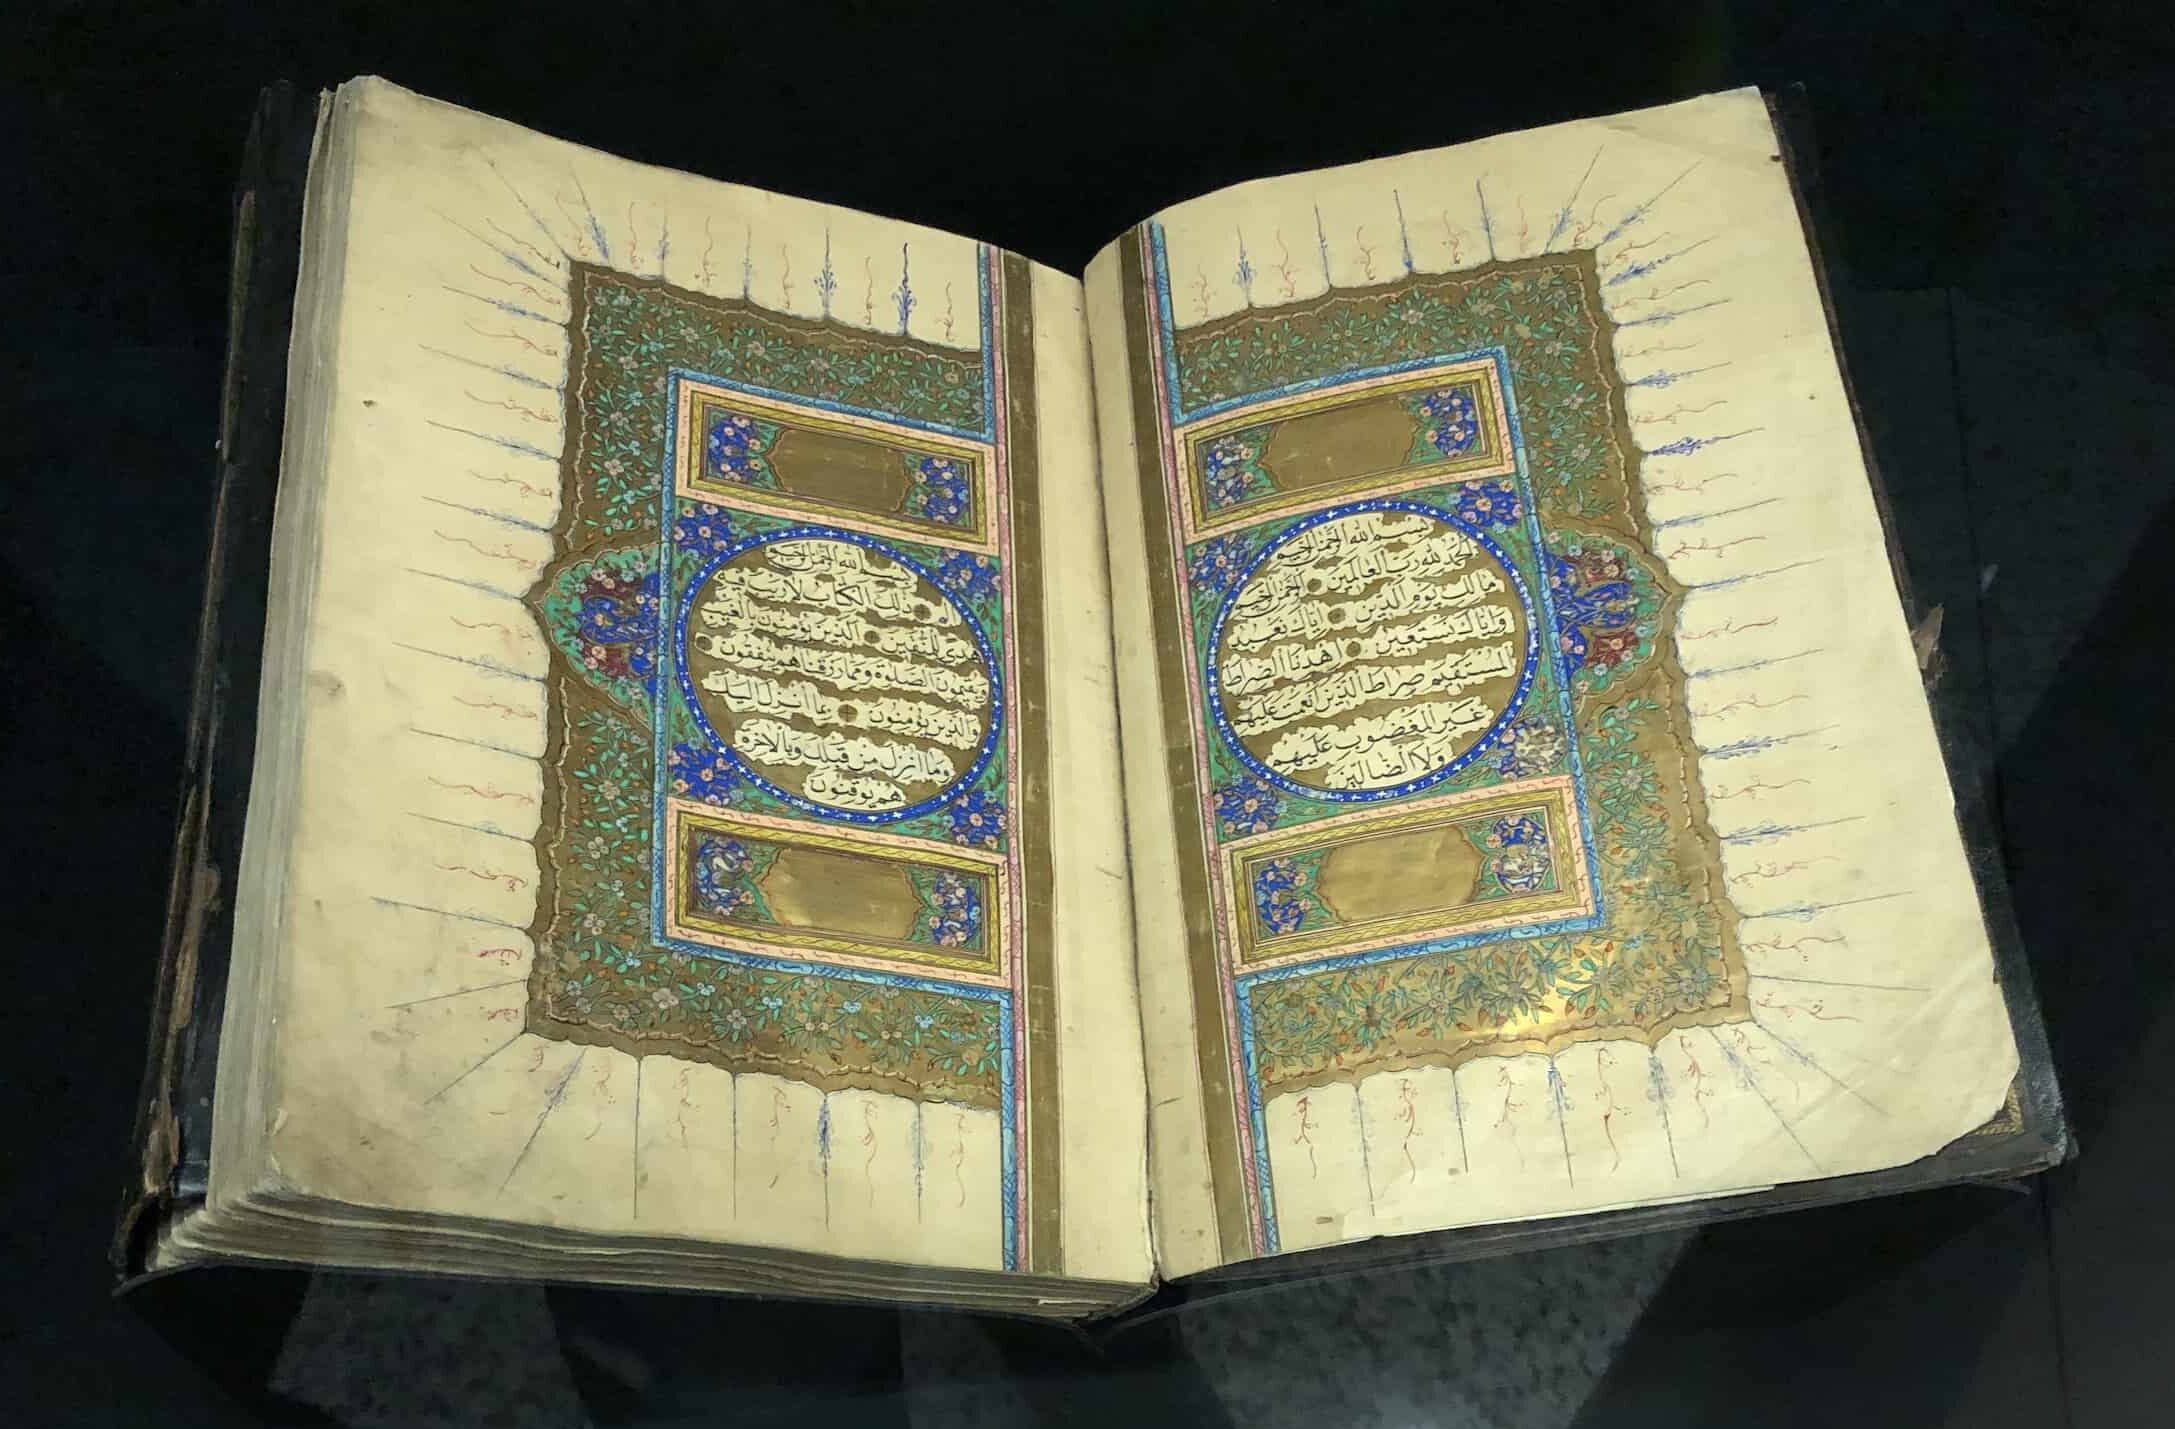 Safavid Quran dated to the second half of the 16th century